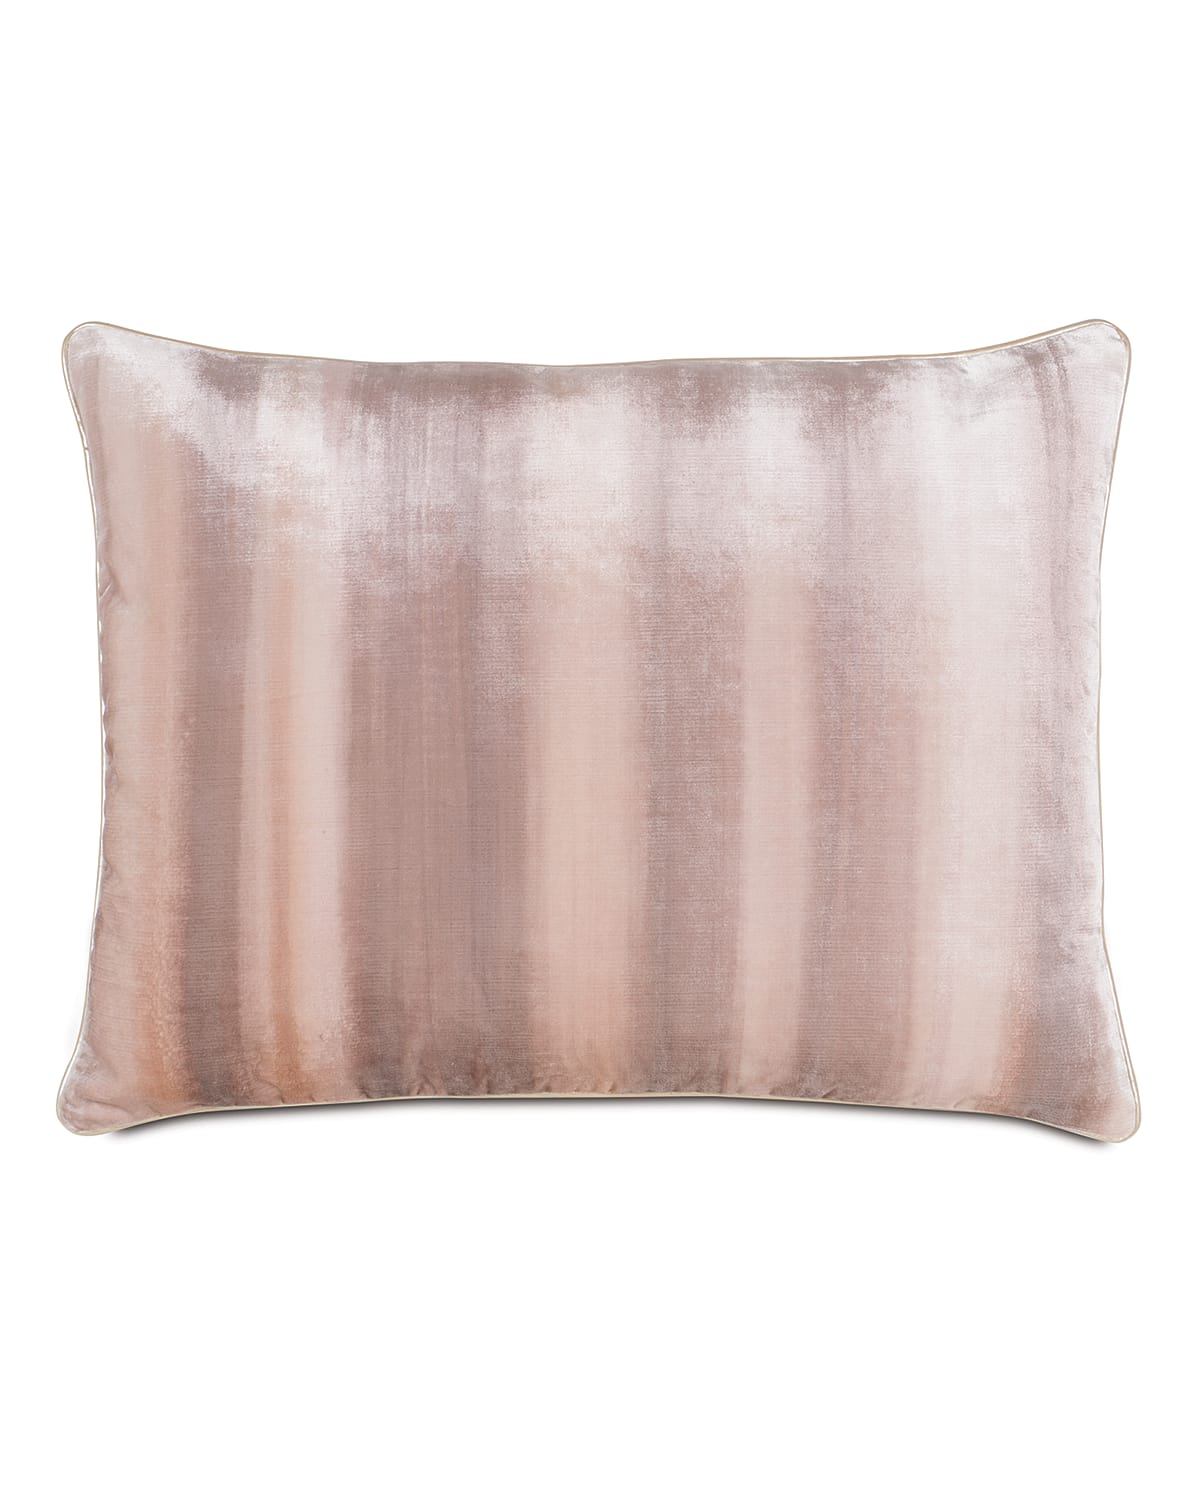 Eastern Accents Halo Standard Sham In Pink